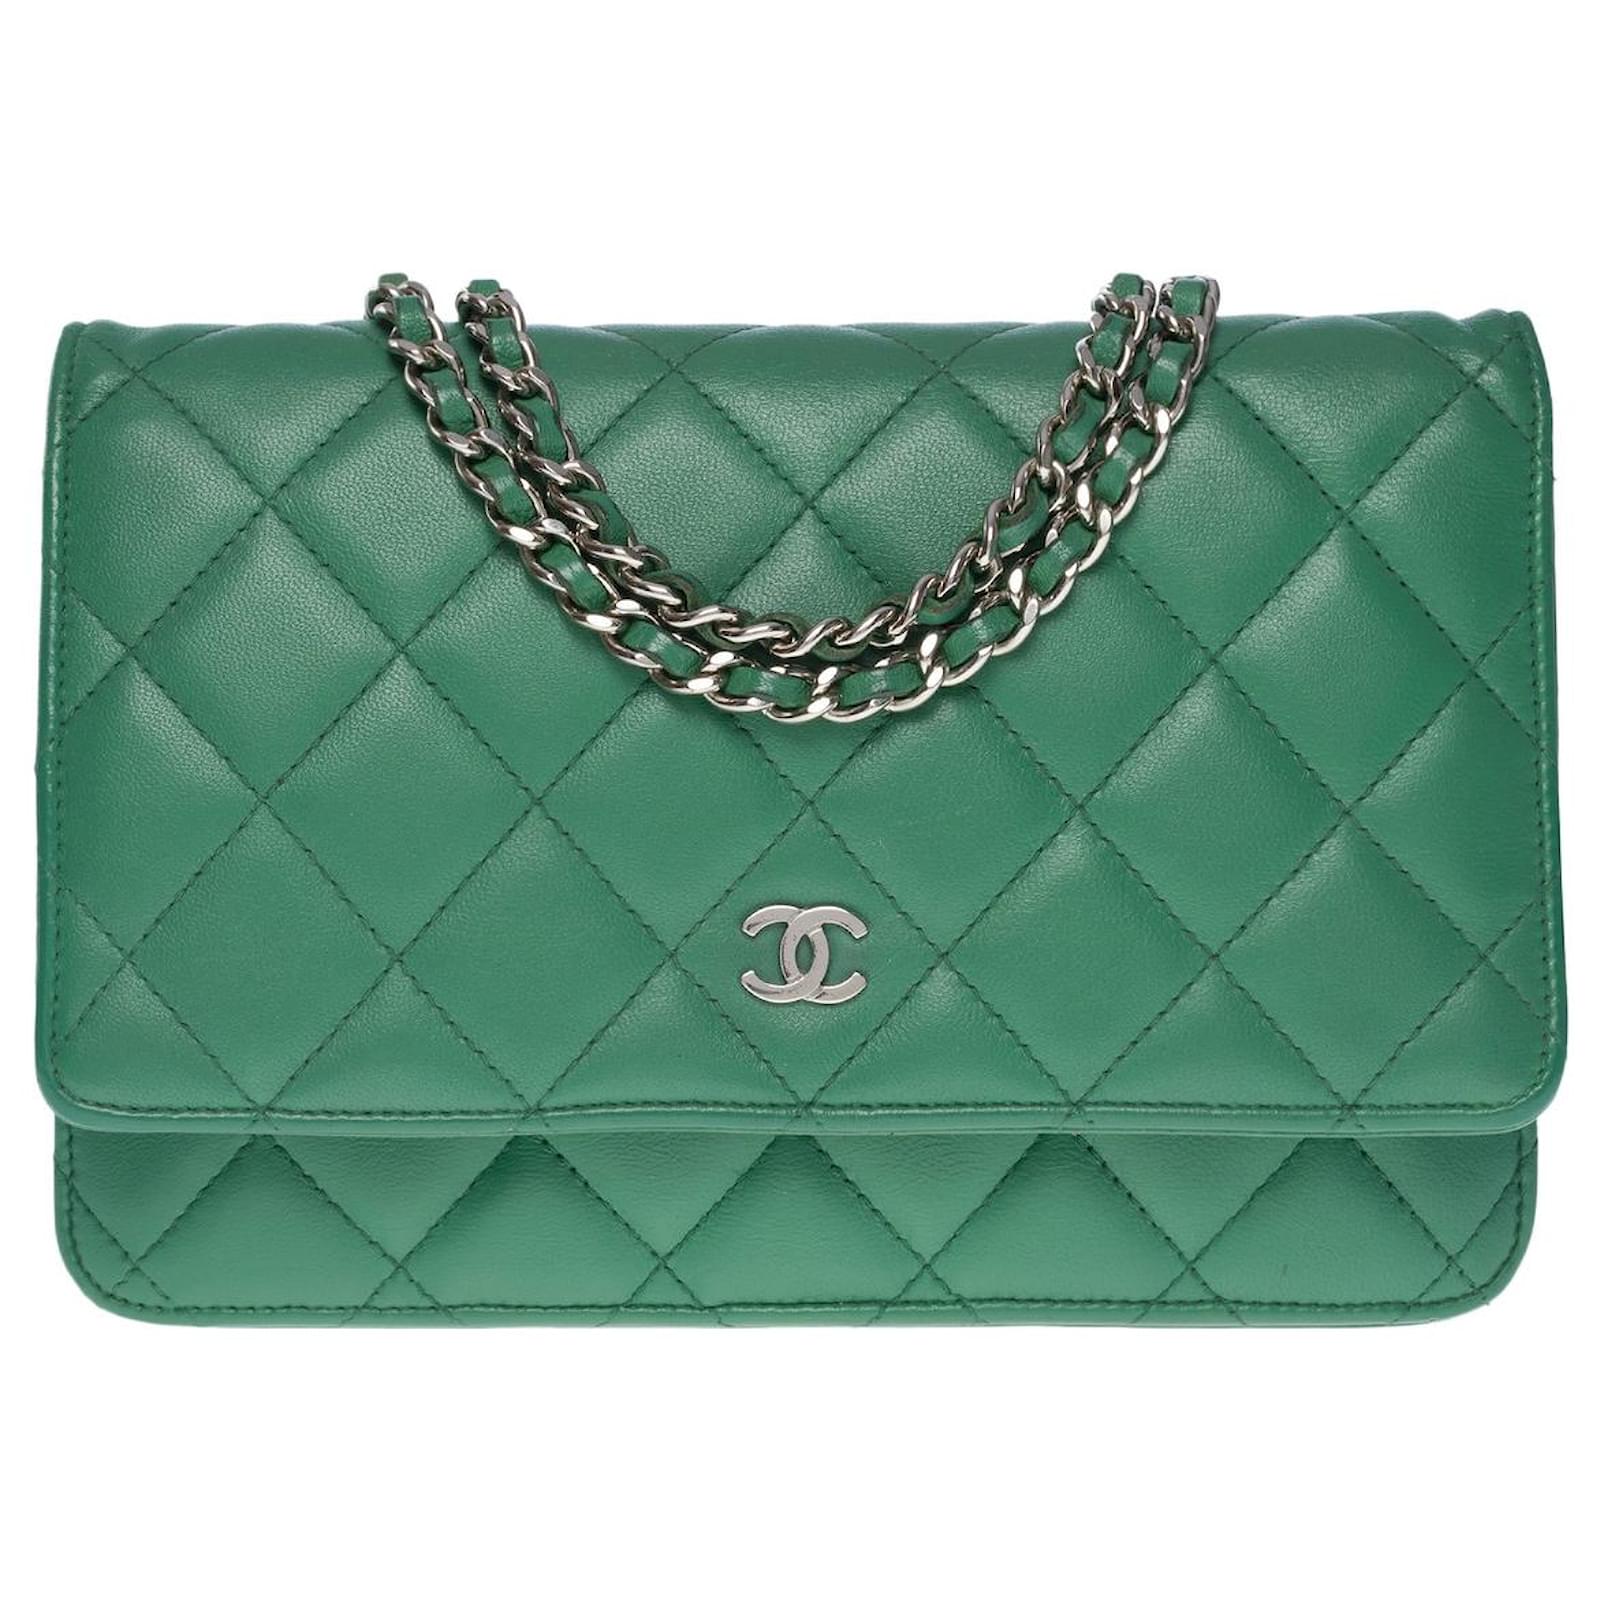 CHANEL Wallet on Chain Bag in Green Leather - 101006